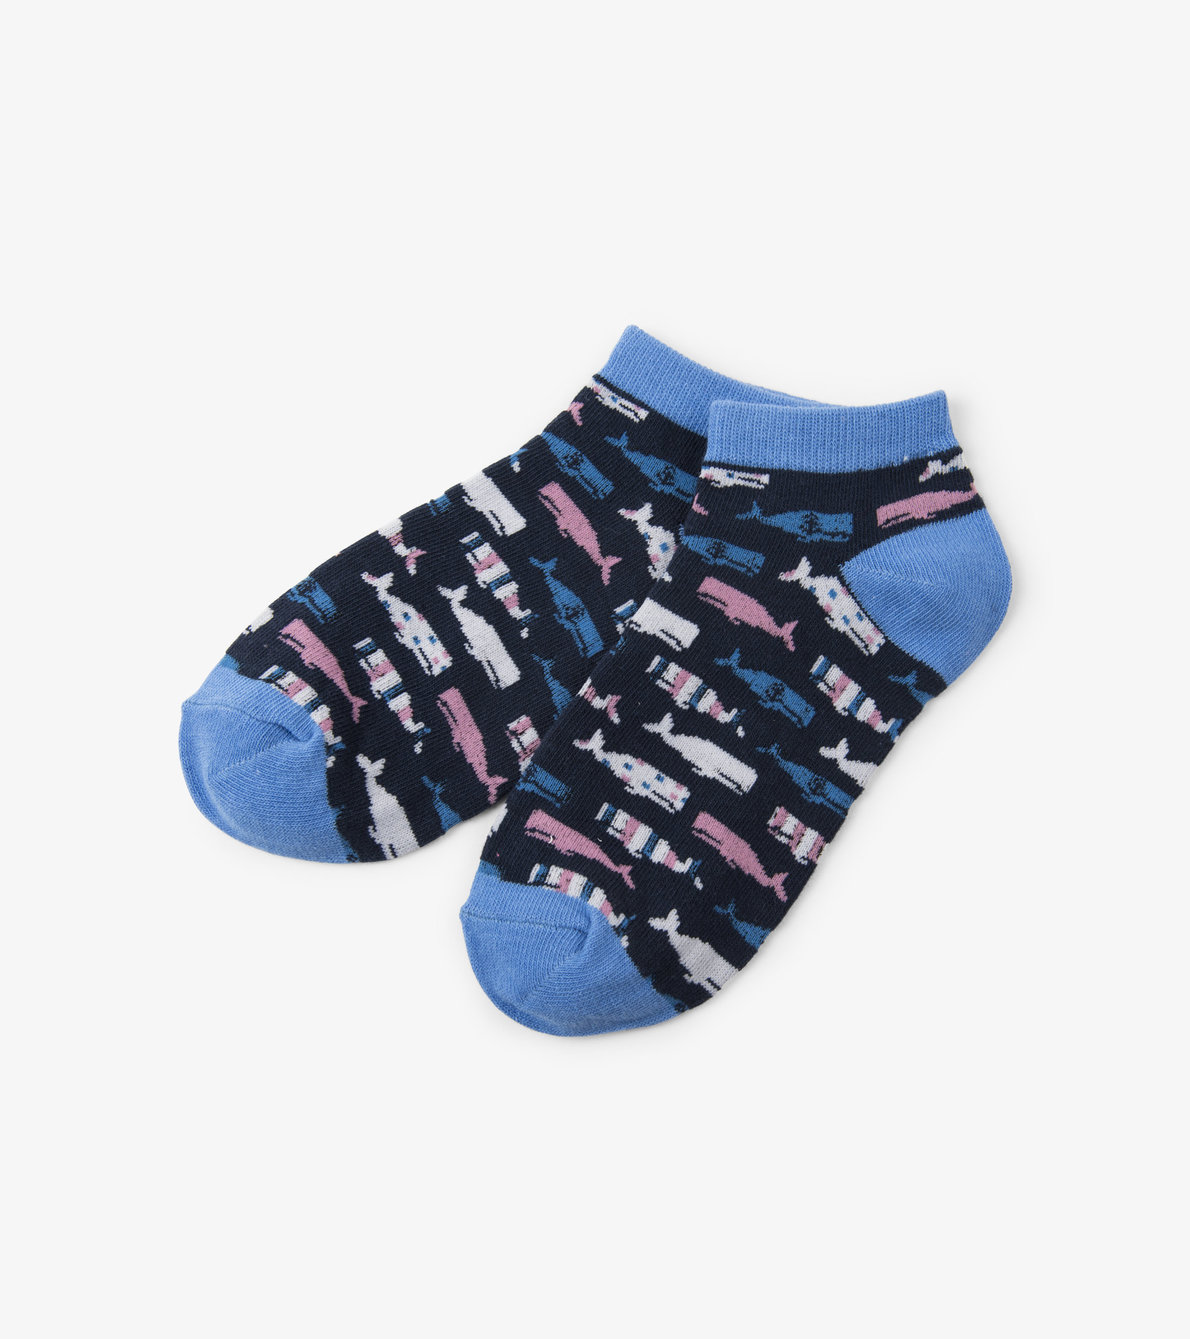 View larger image of Patterned Whales Women's Ankle Socks